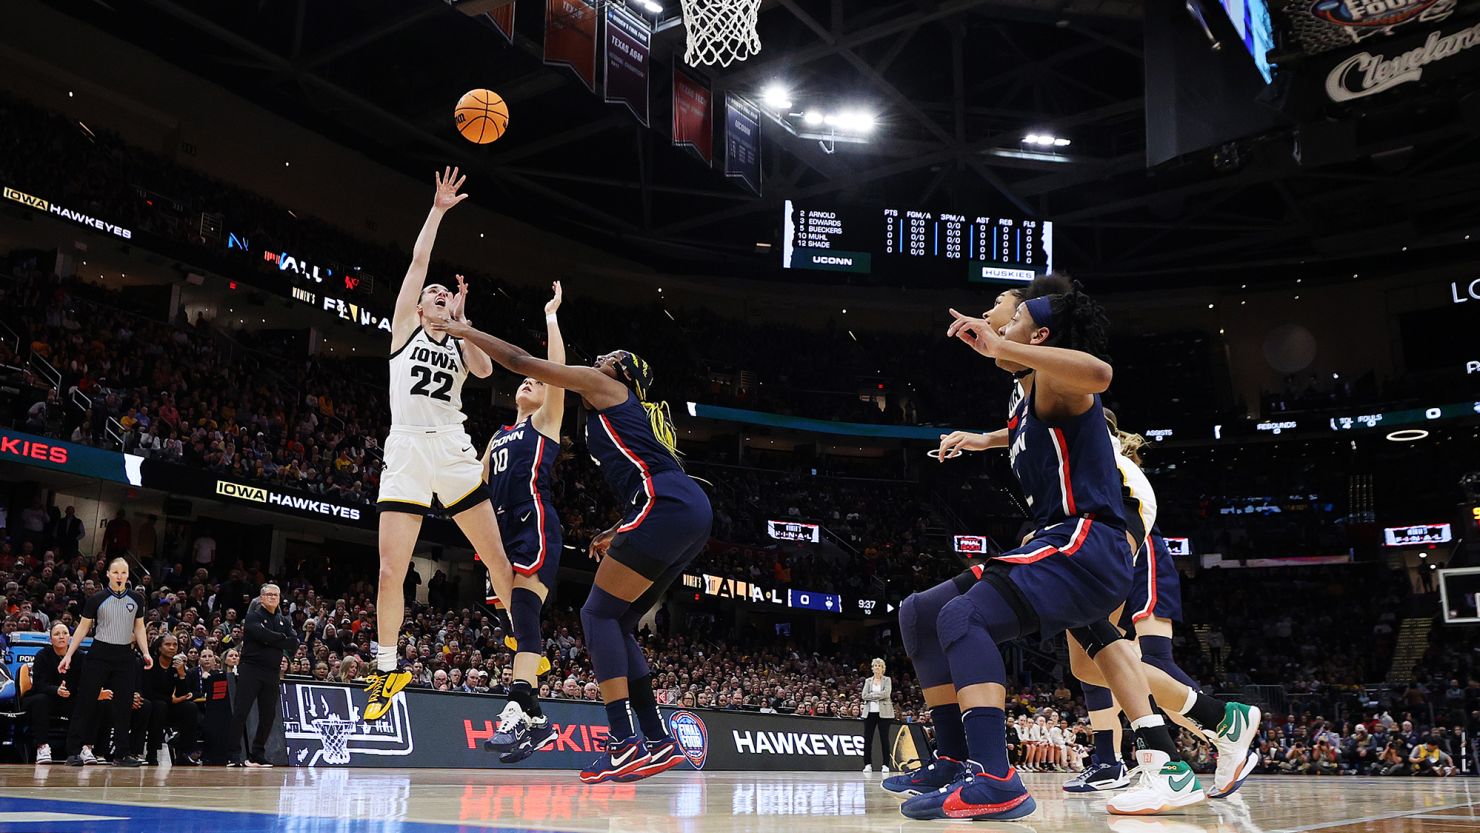 Caitlin Clark of the Iowa Hawkeyes in the first half during the NCAA Women's semifinal game against the UConn Huskies on April 5 in Cleveland, Ohio.